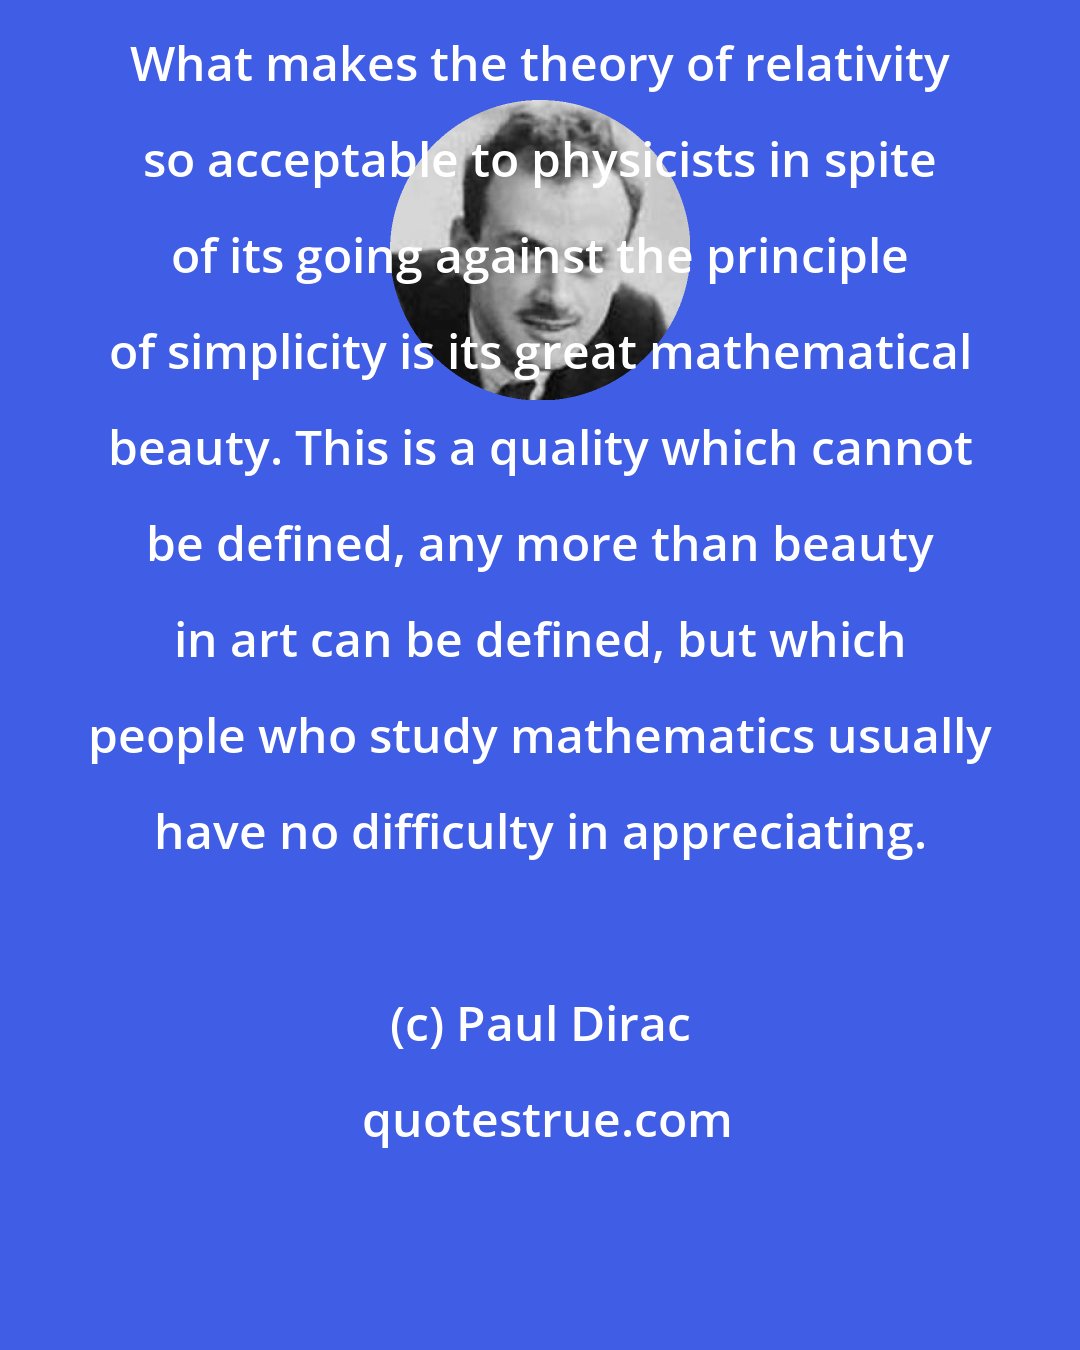 Paul Dirac: What makes the theory of relativity so acceptable to physicists in spite of its going against the principle of simplicity is its great mathematical beauty. This is a quality which cannot be defined, any more than beauty in art can be defined, but which people who study mathematics usually have no difficulty in appreciating.